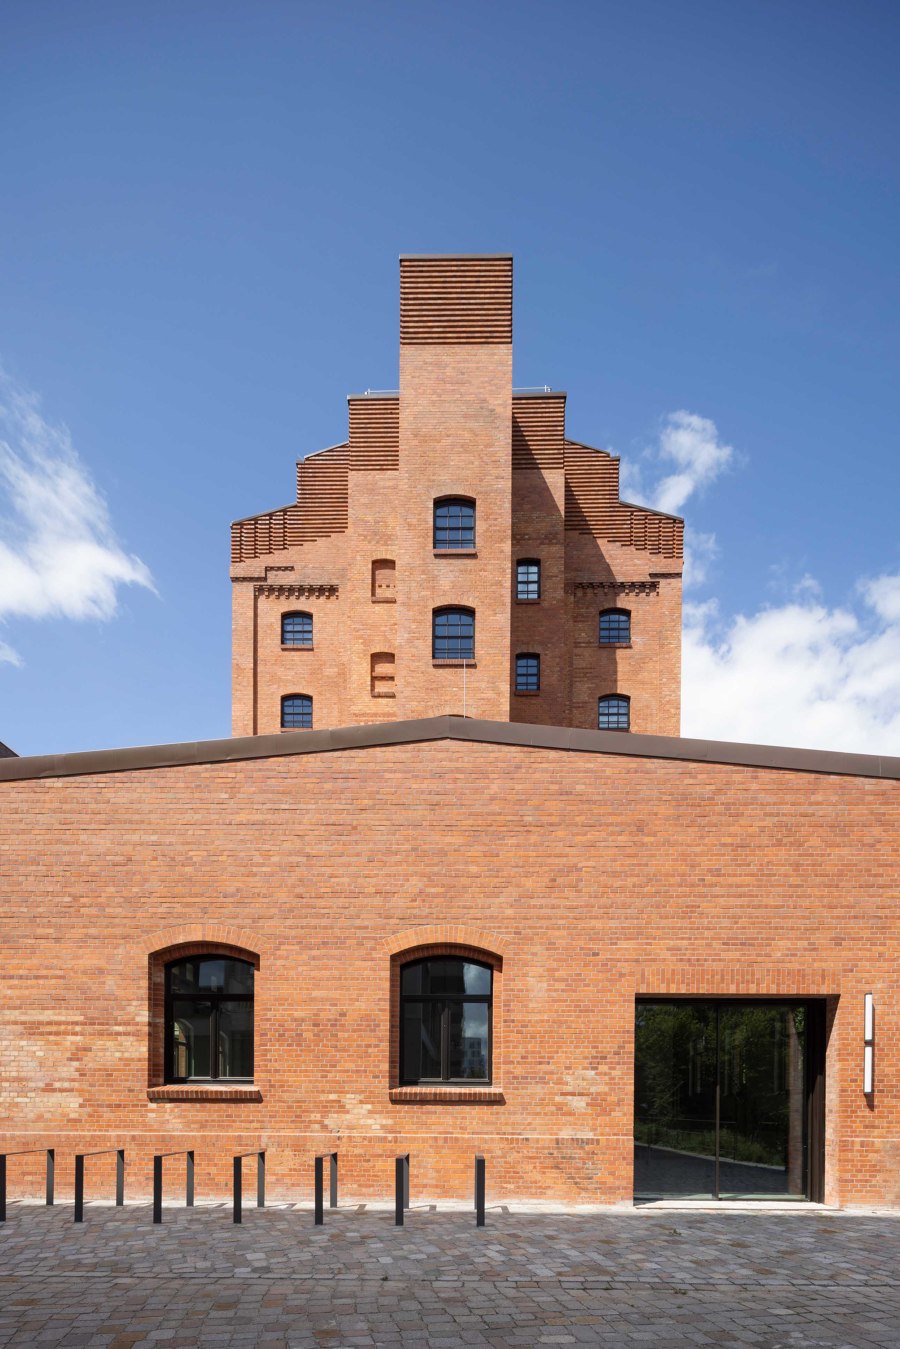 An industrial landmark offering new perspectives | News